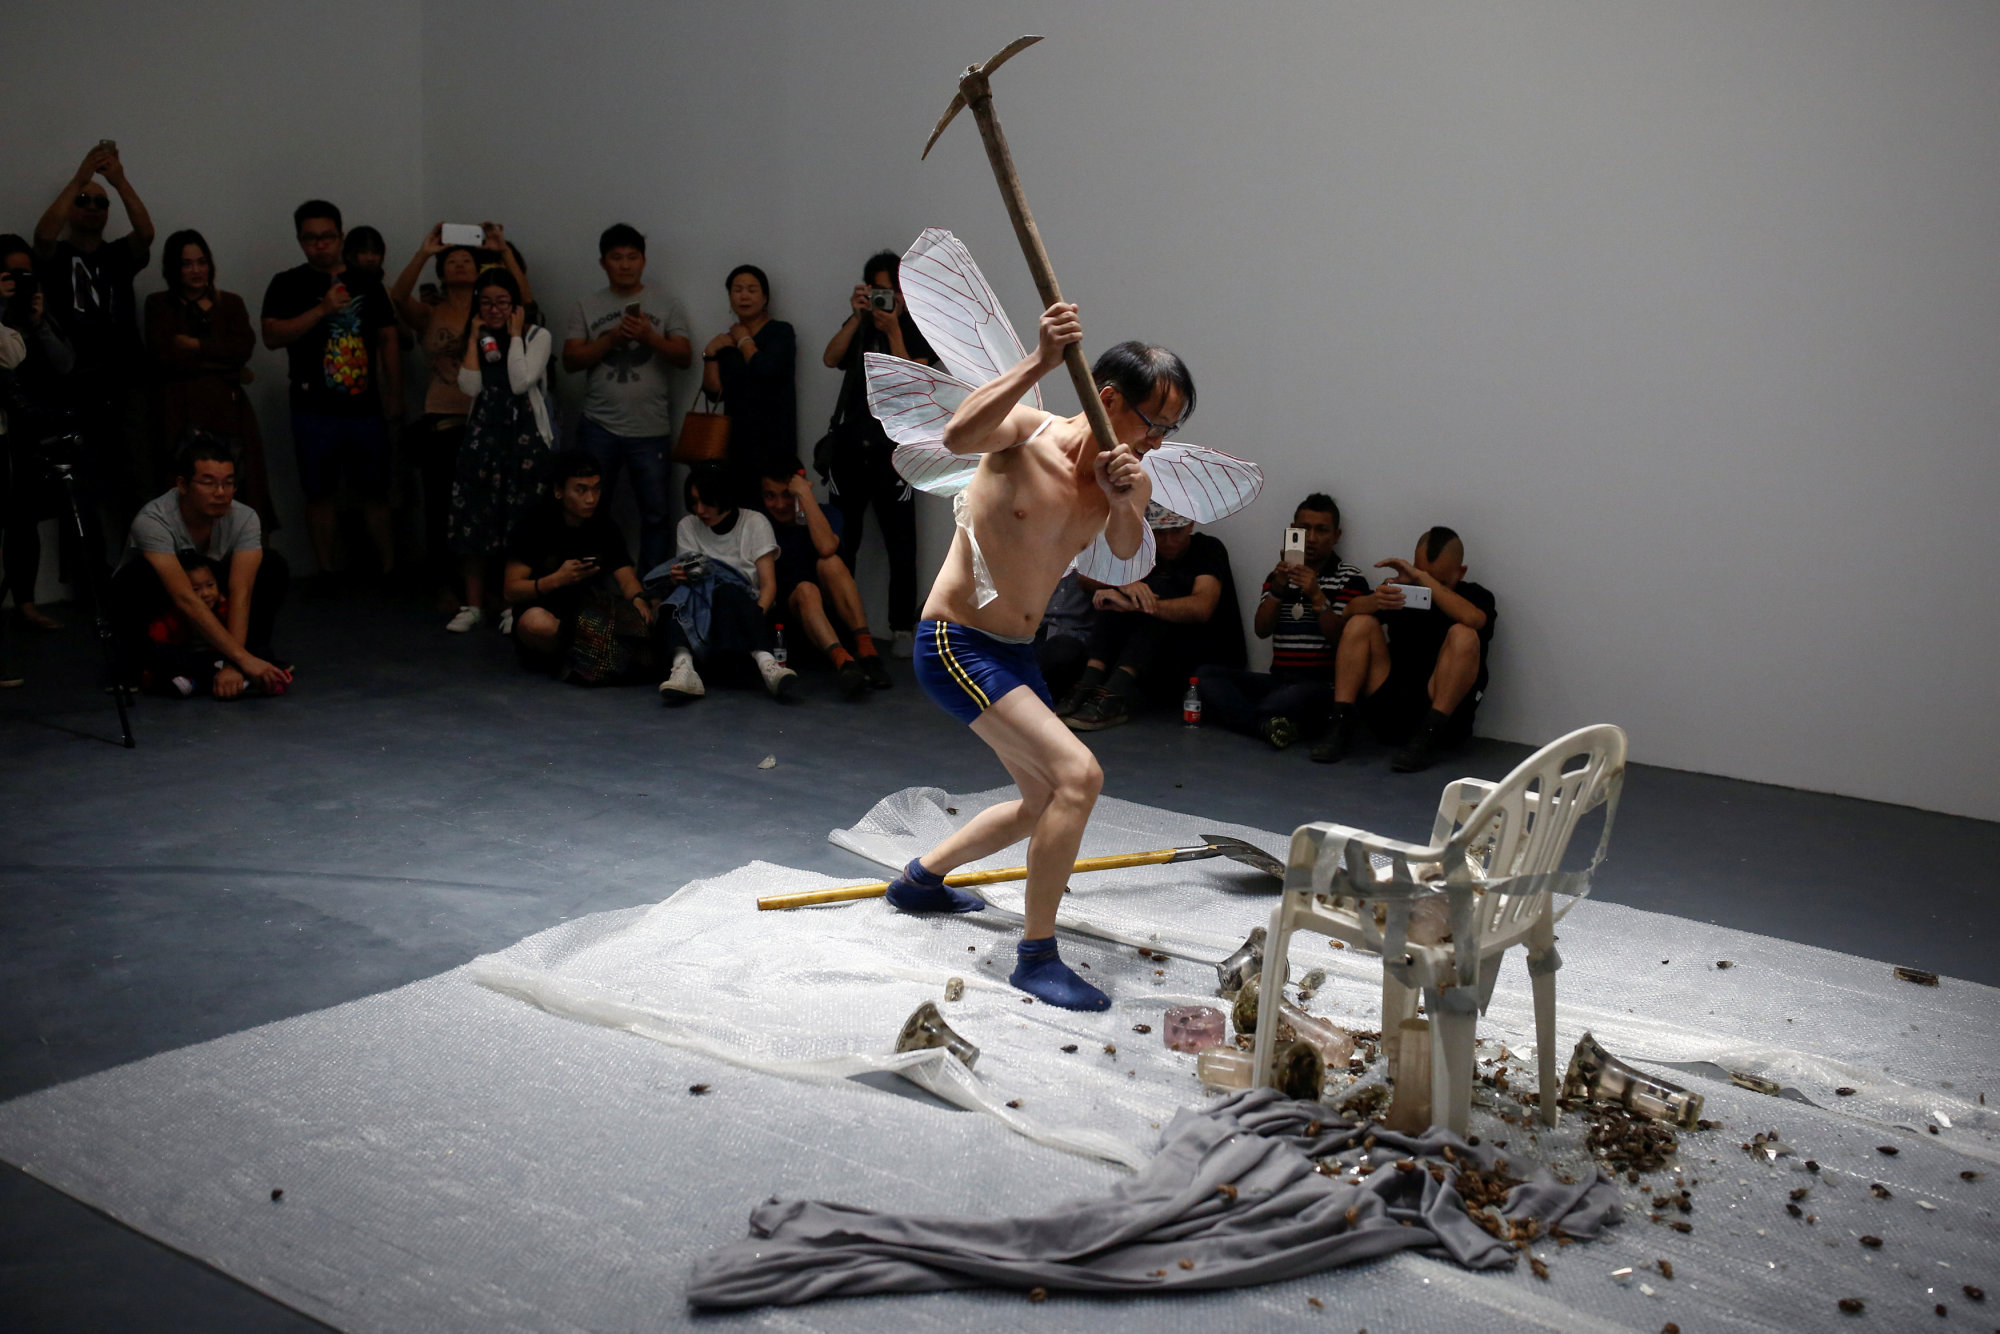 Huang Wenya, a Chinese performance artist, smashes objects as he performs 'Aftersound' at the OPEN international performance art festival in the Songzhuang art colony near Beijing in September. | REUTERS